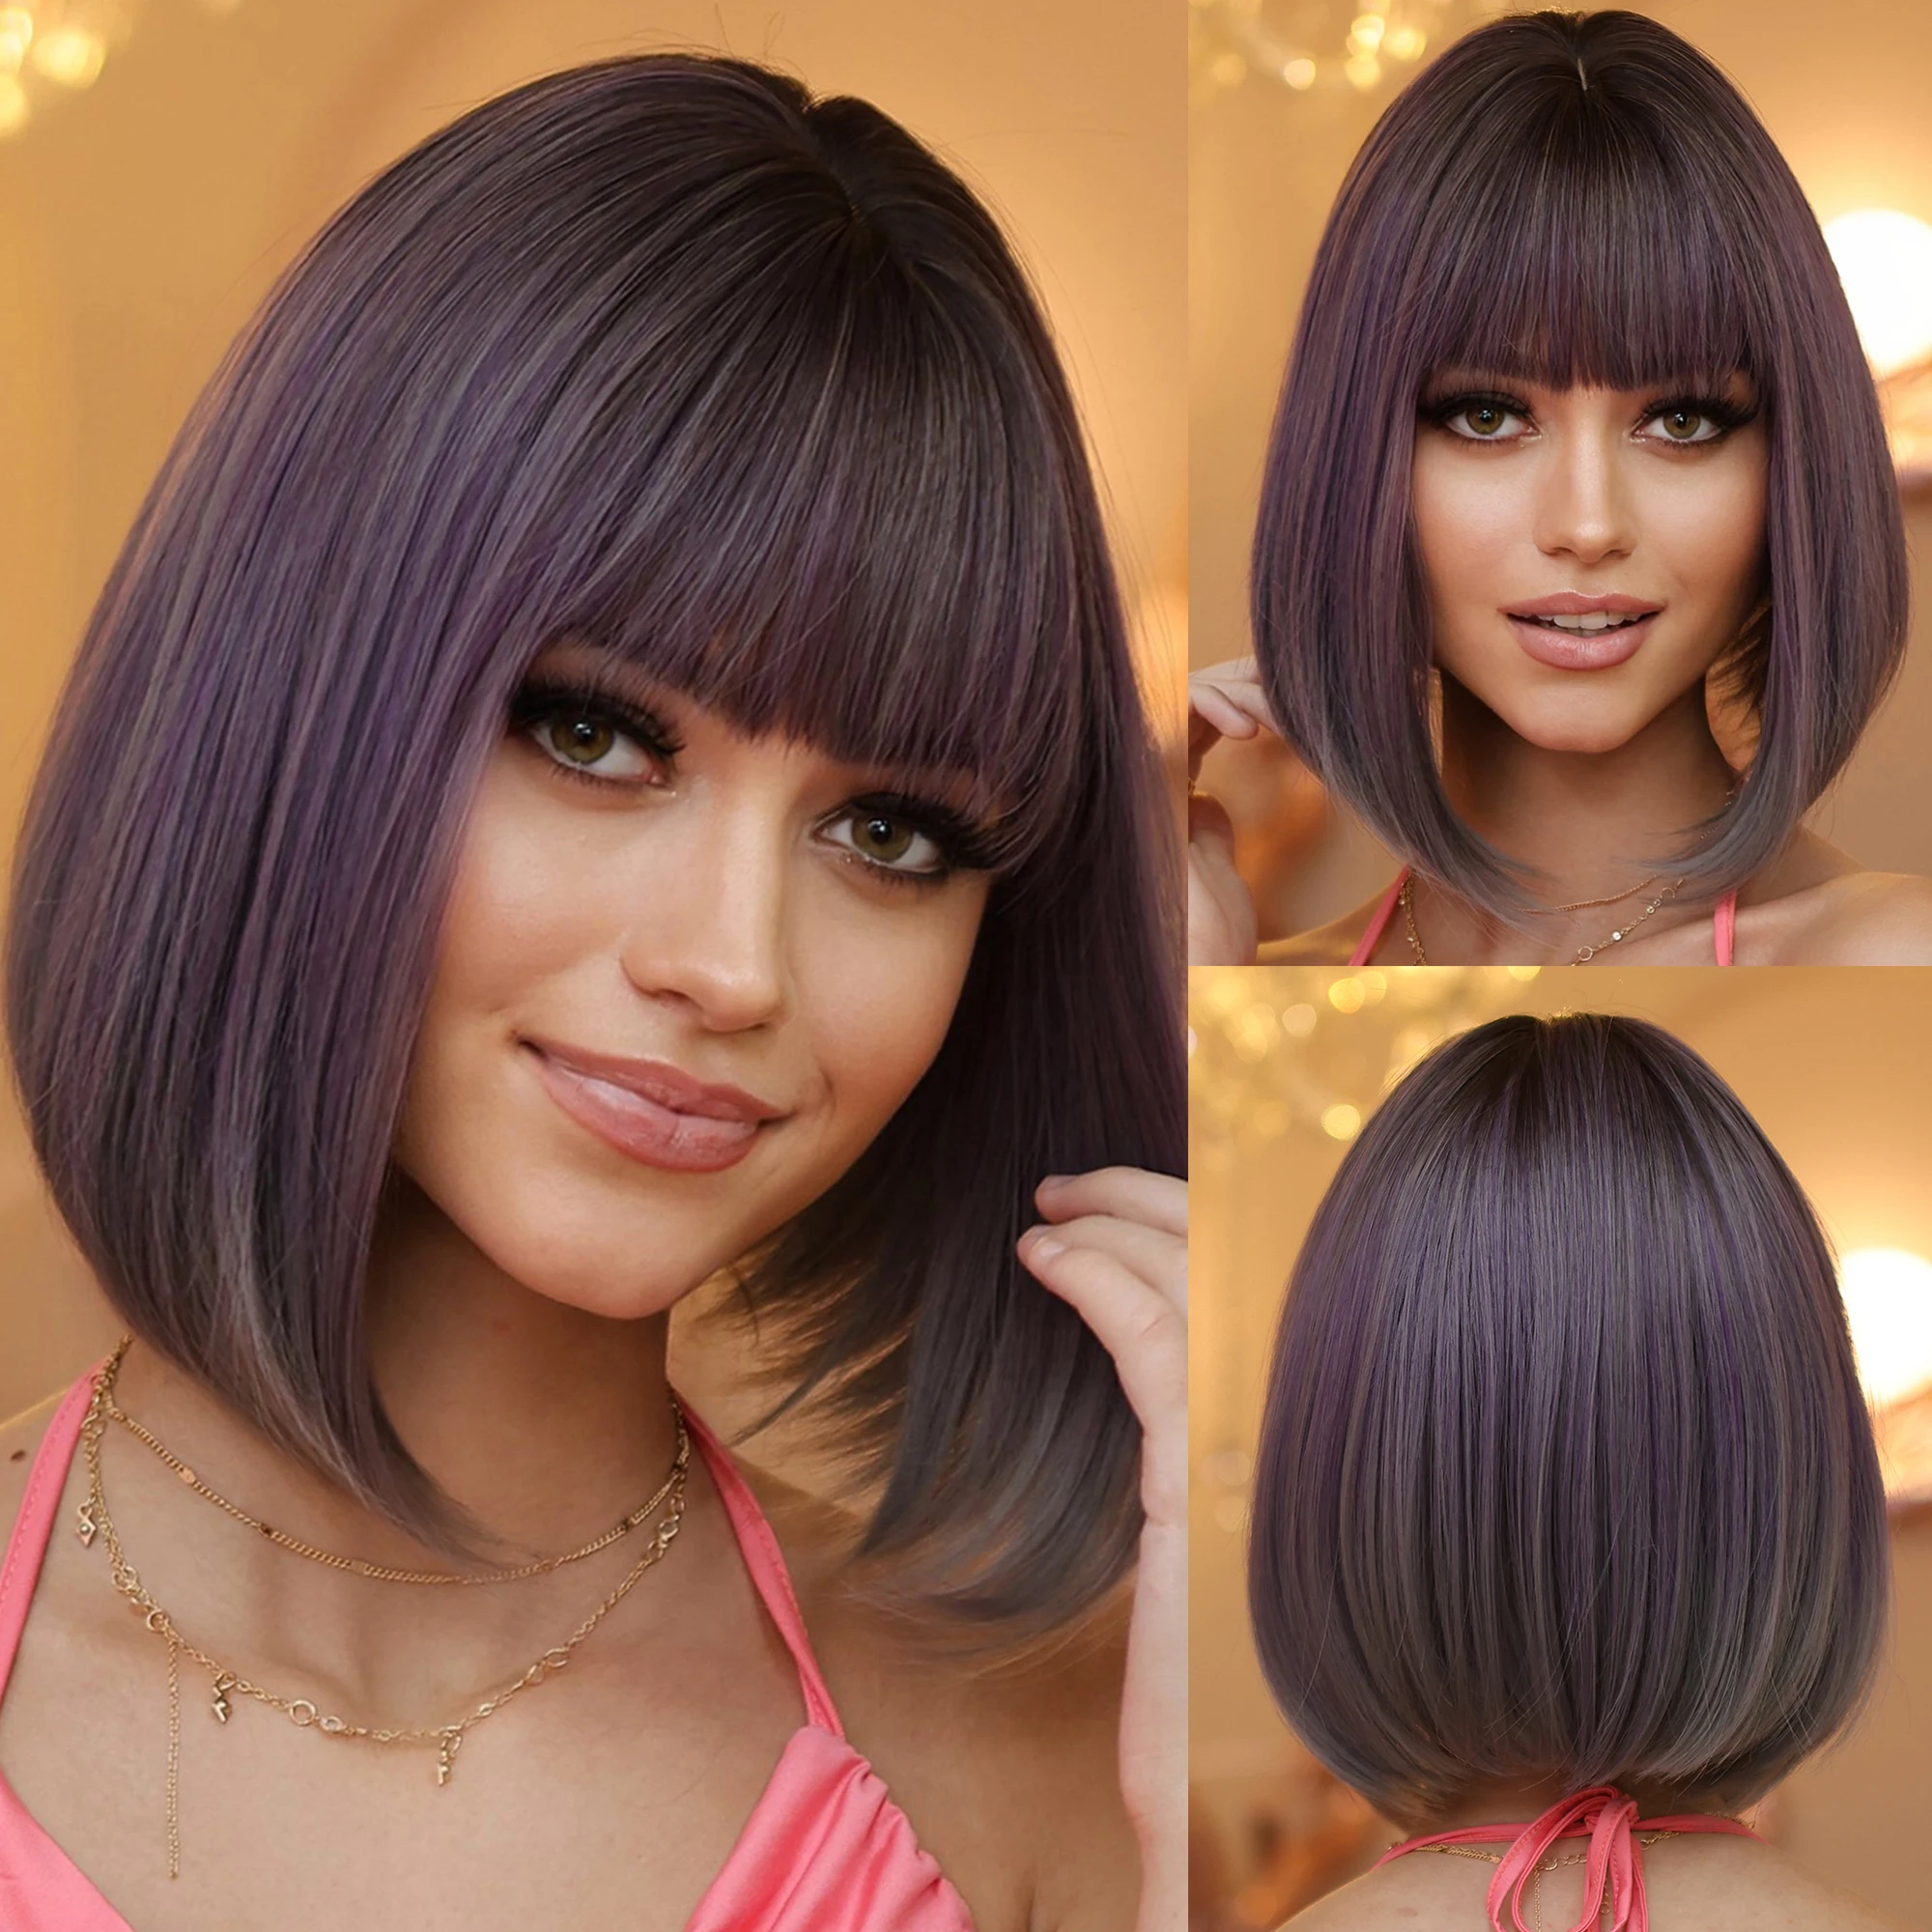 

Purple Ombre Cosplay Synthetic Wigs Short Bob Straight Lolita Halloween Hair Wig with Bangs for Women Afro Heat Resistant